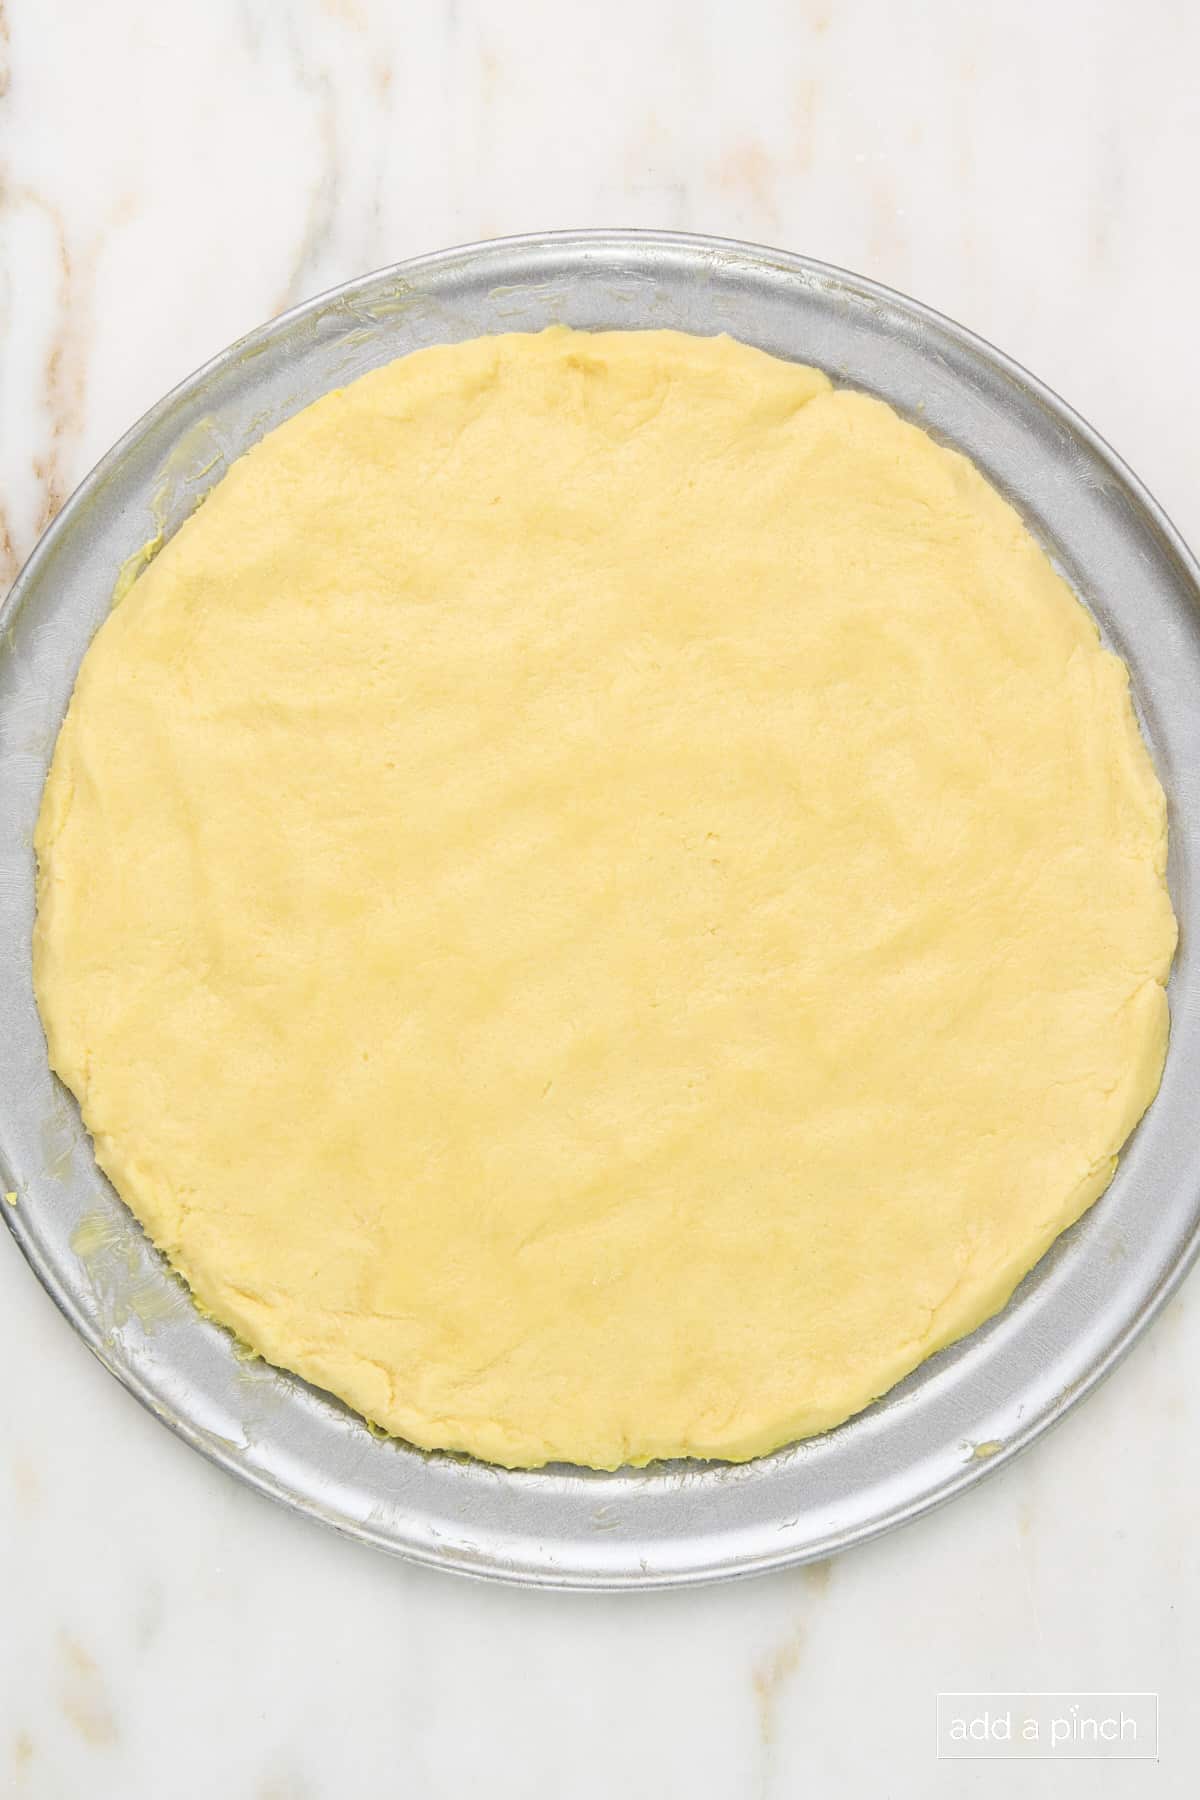 Sugar cookie dough pressed into a pizza pan